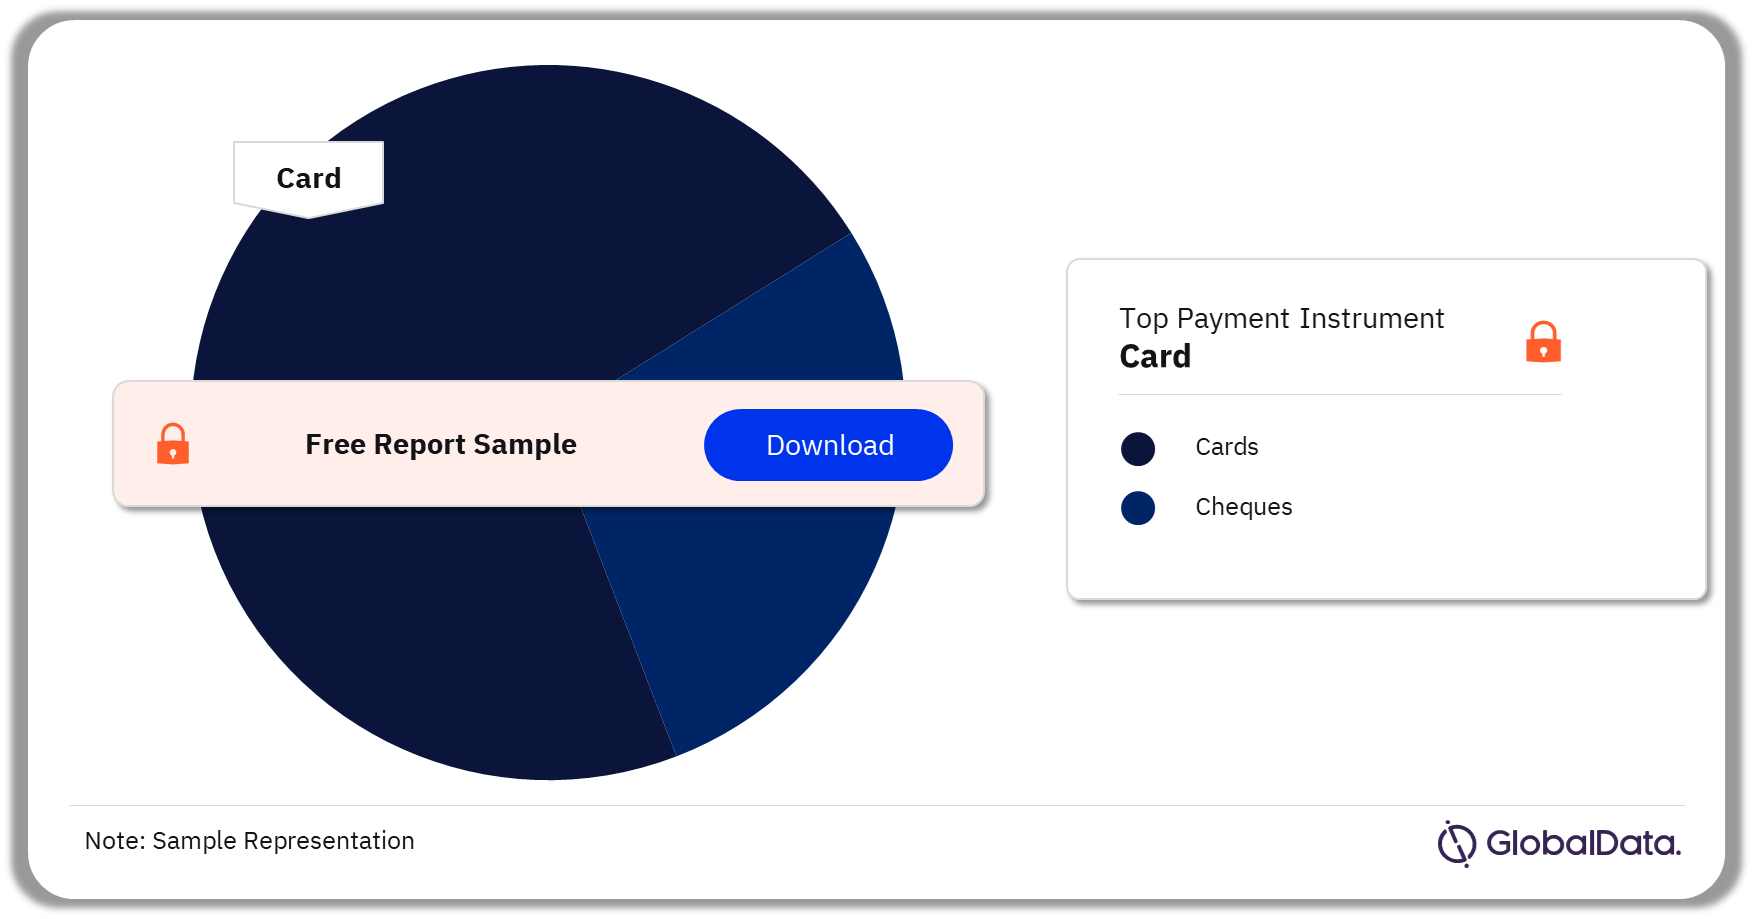 Cambodia Cards and Payments Market by Payment Instruments